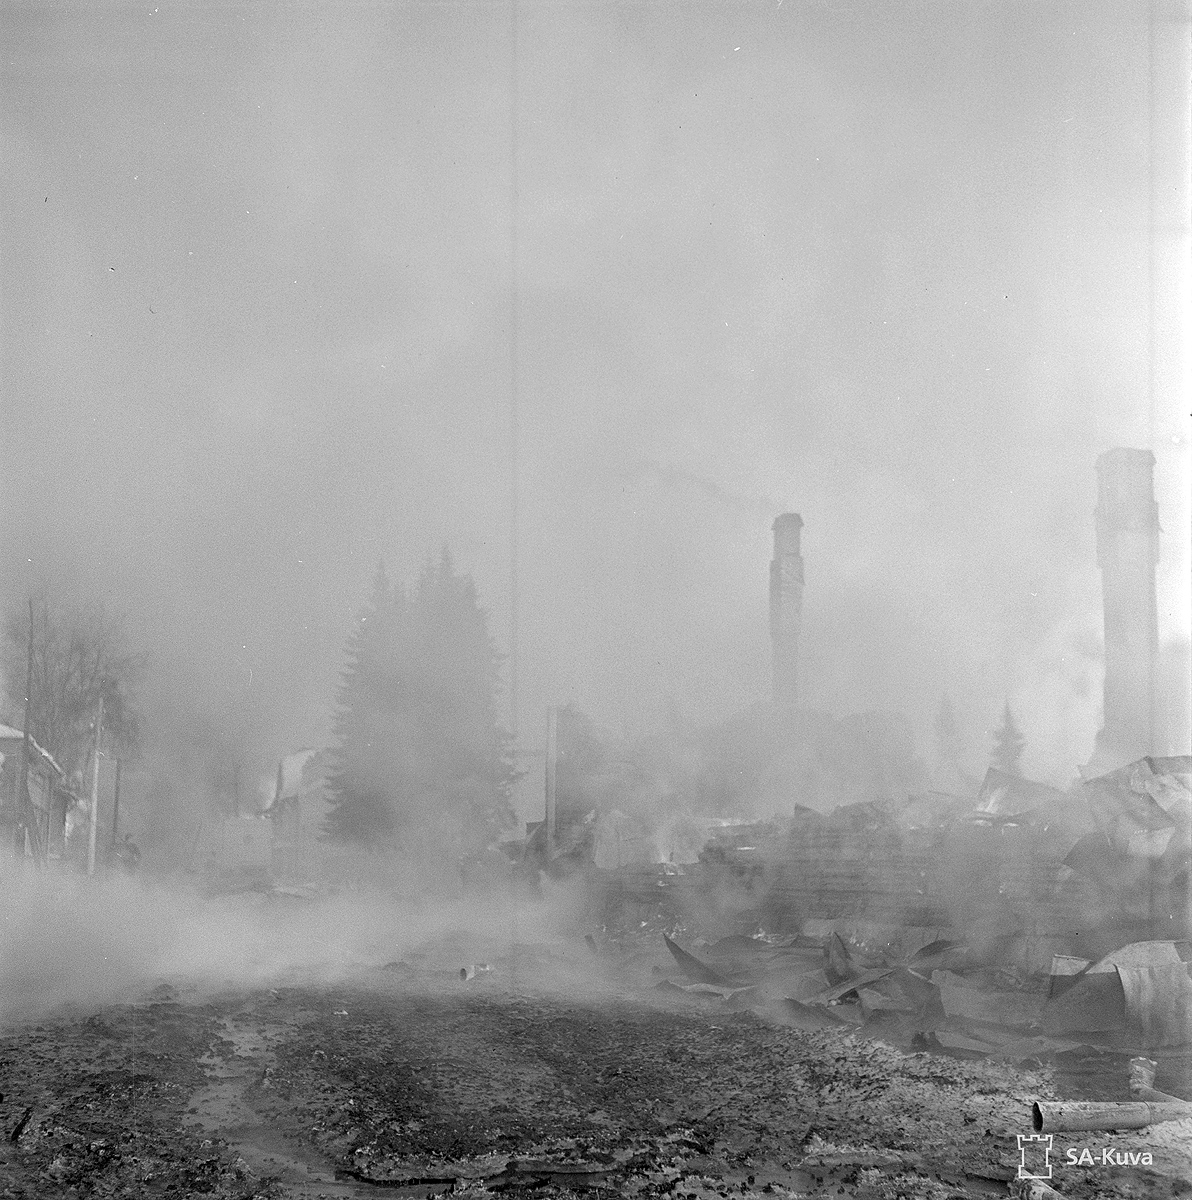 February 3, 1940. Sortavala after the bombing